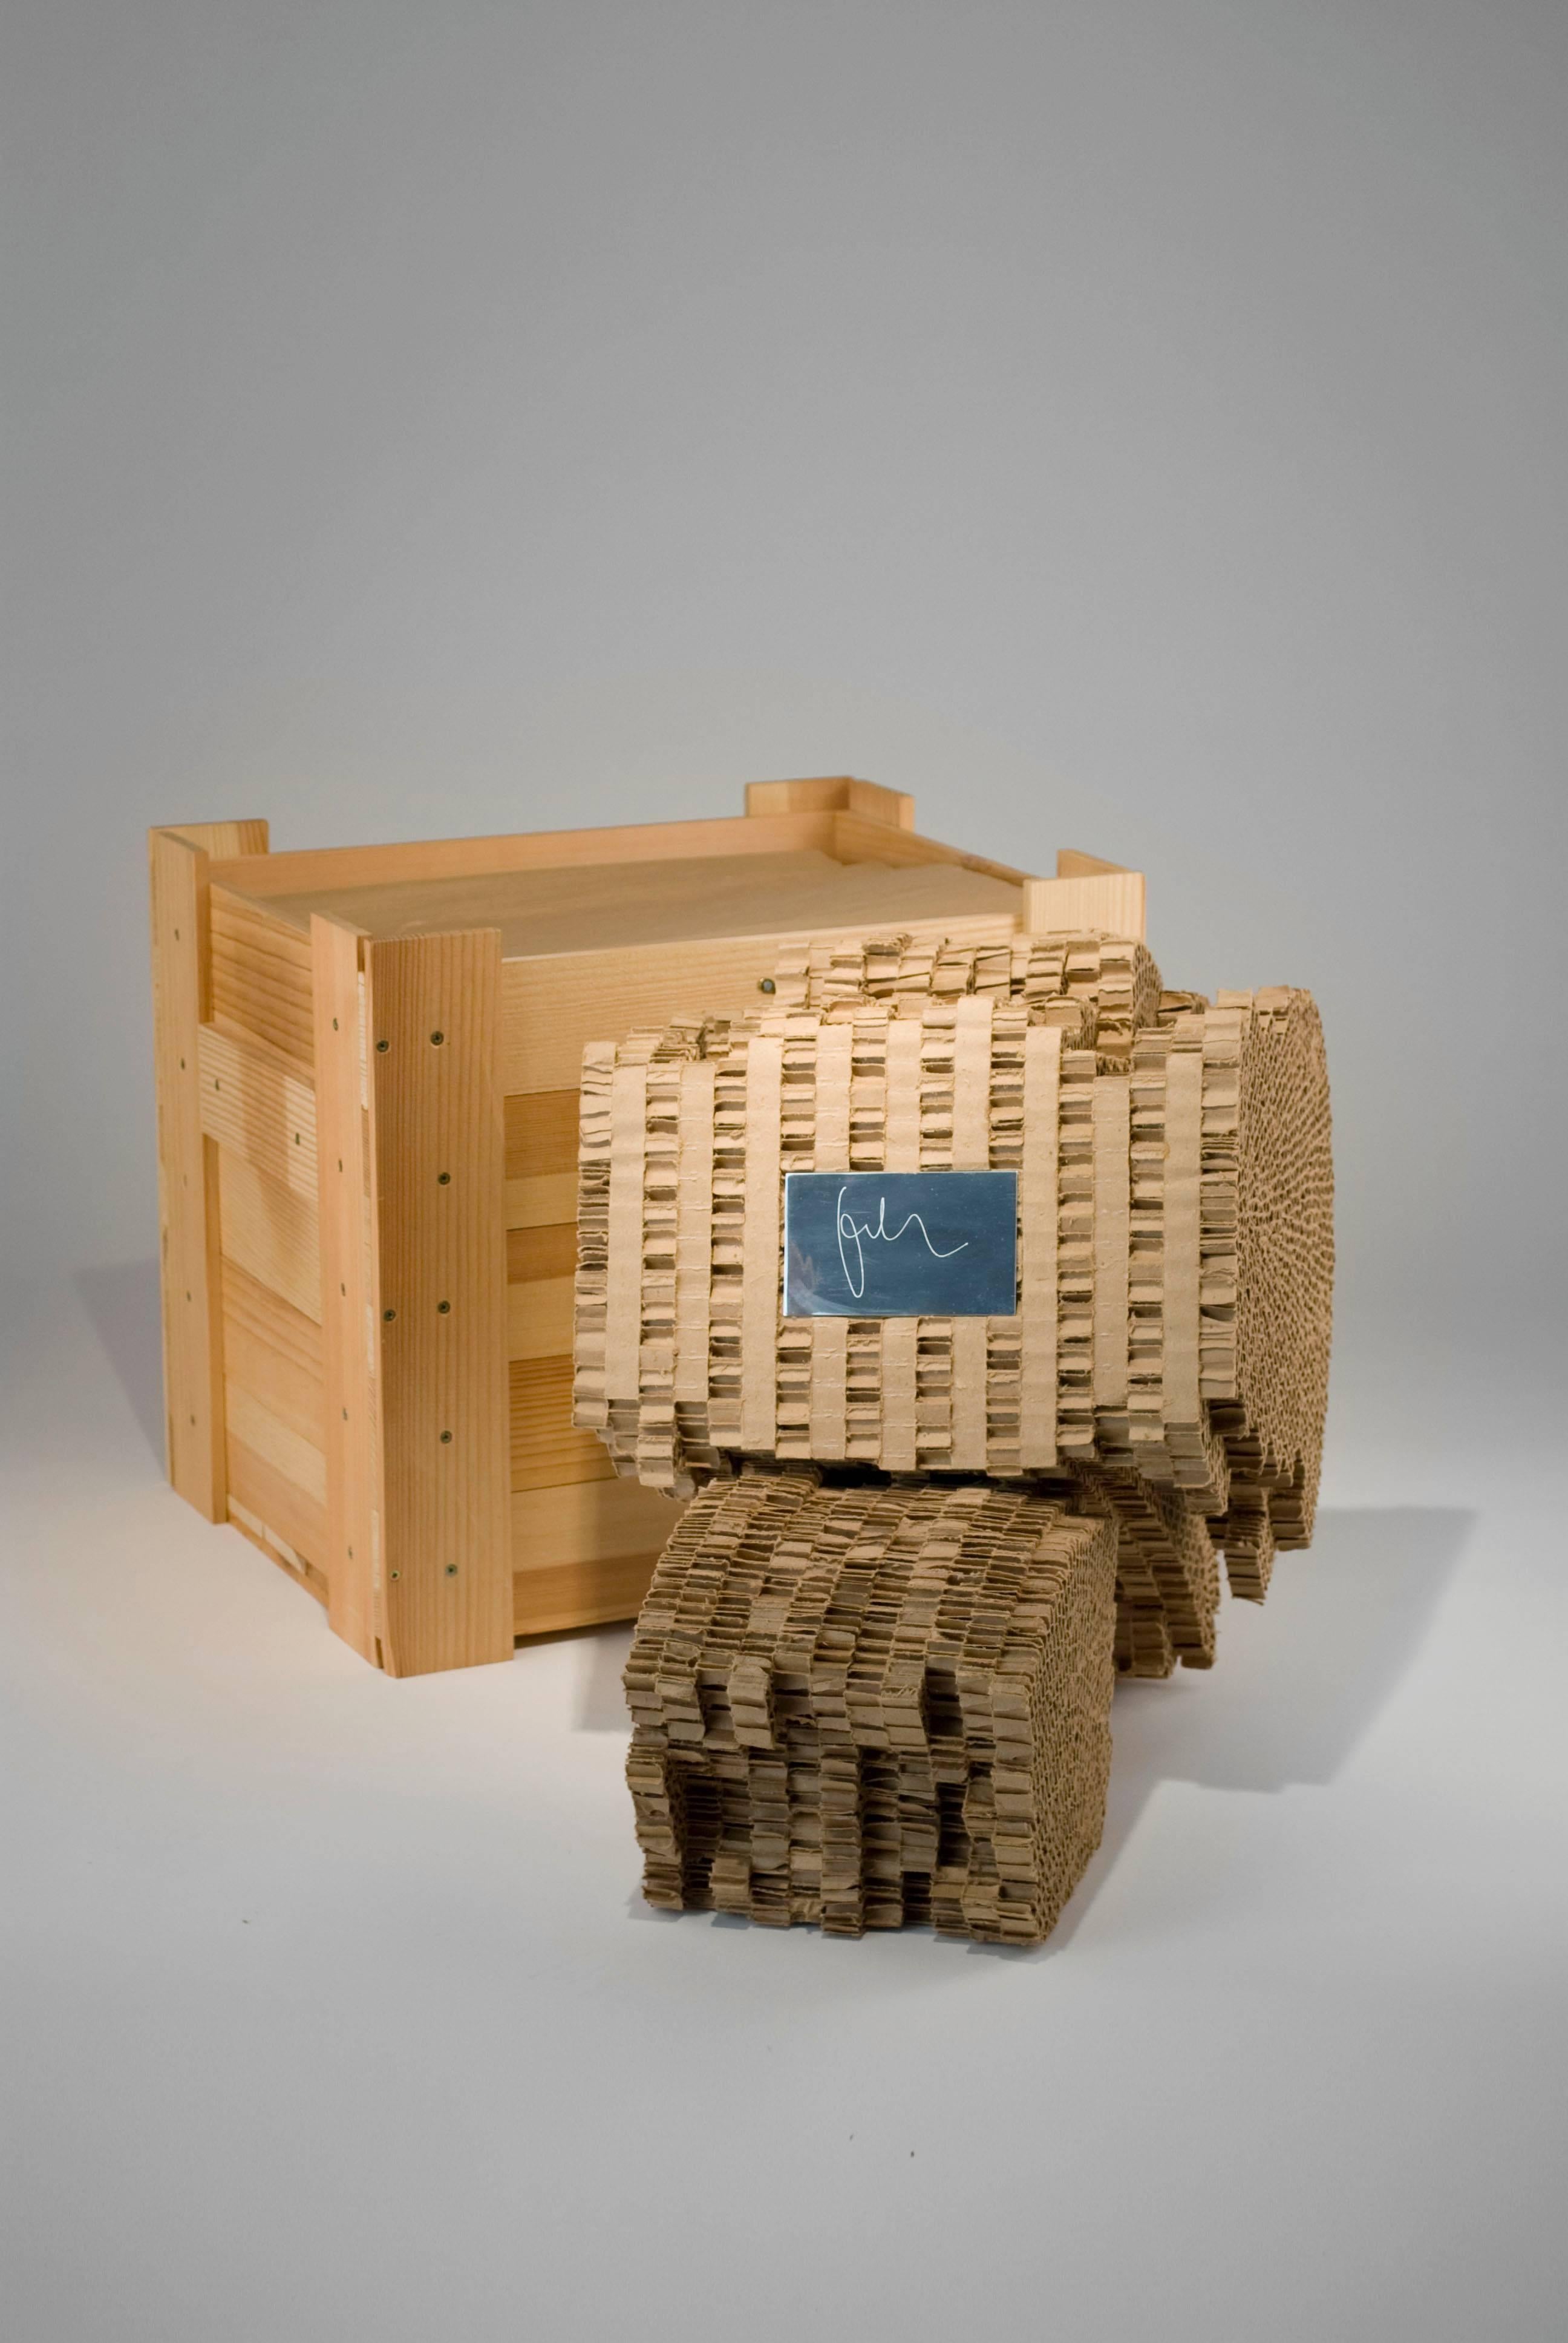 The story goes that one day, architect Frank Gehry noticed a pile of cardboard outside his office, a material he preferred for his architectural models, and he began to glue laminated pieces together and then carve them with a hand saw and pocket